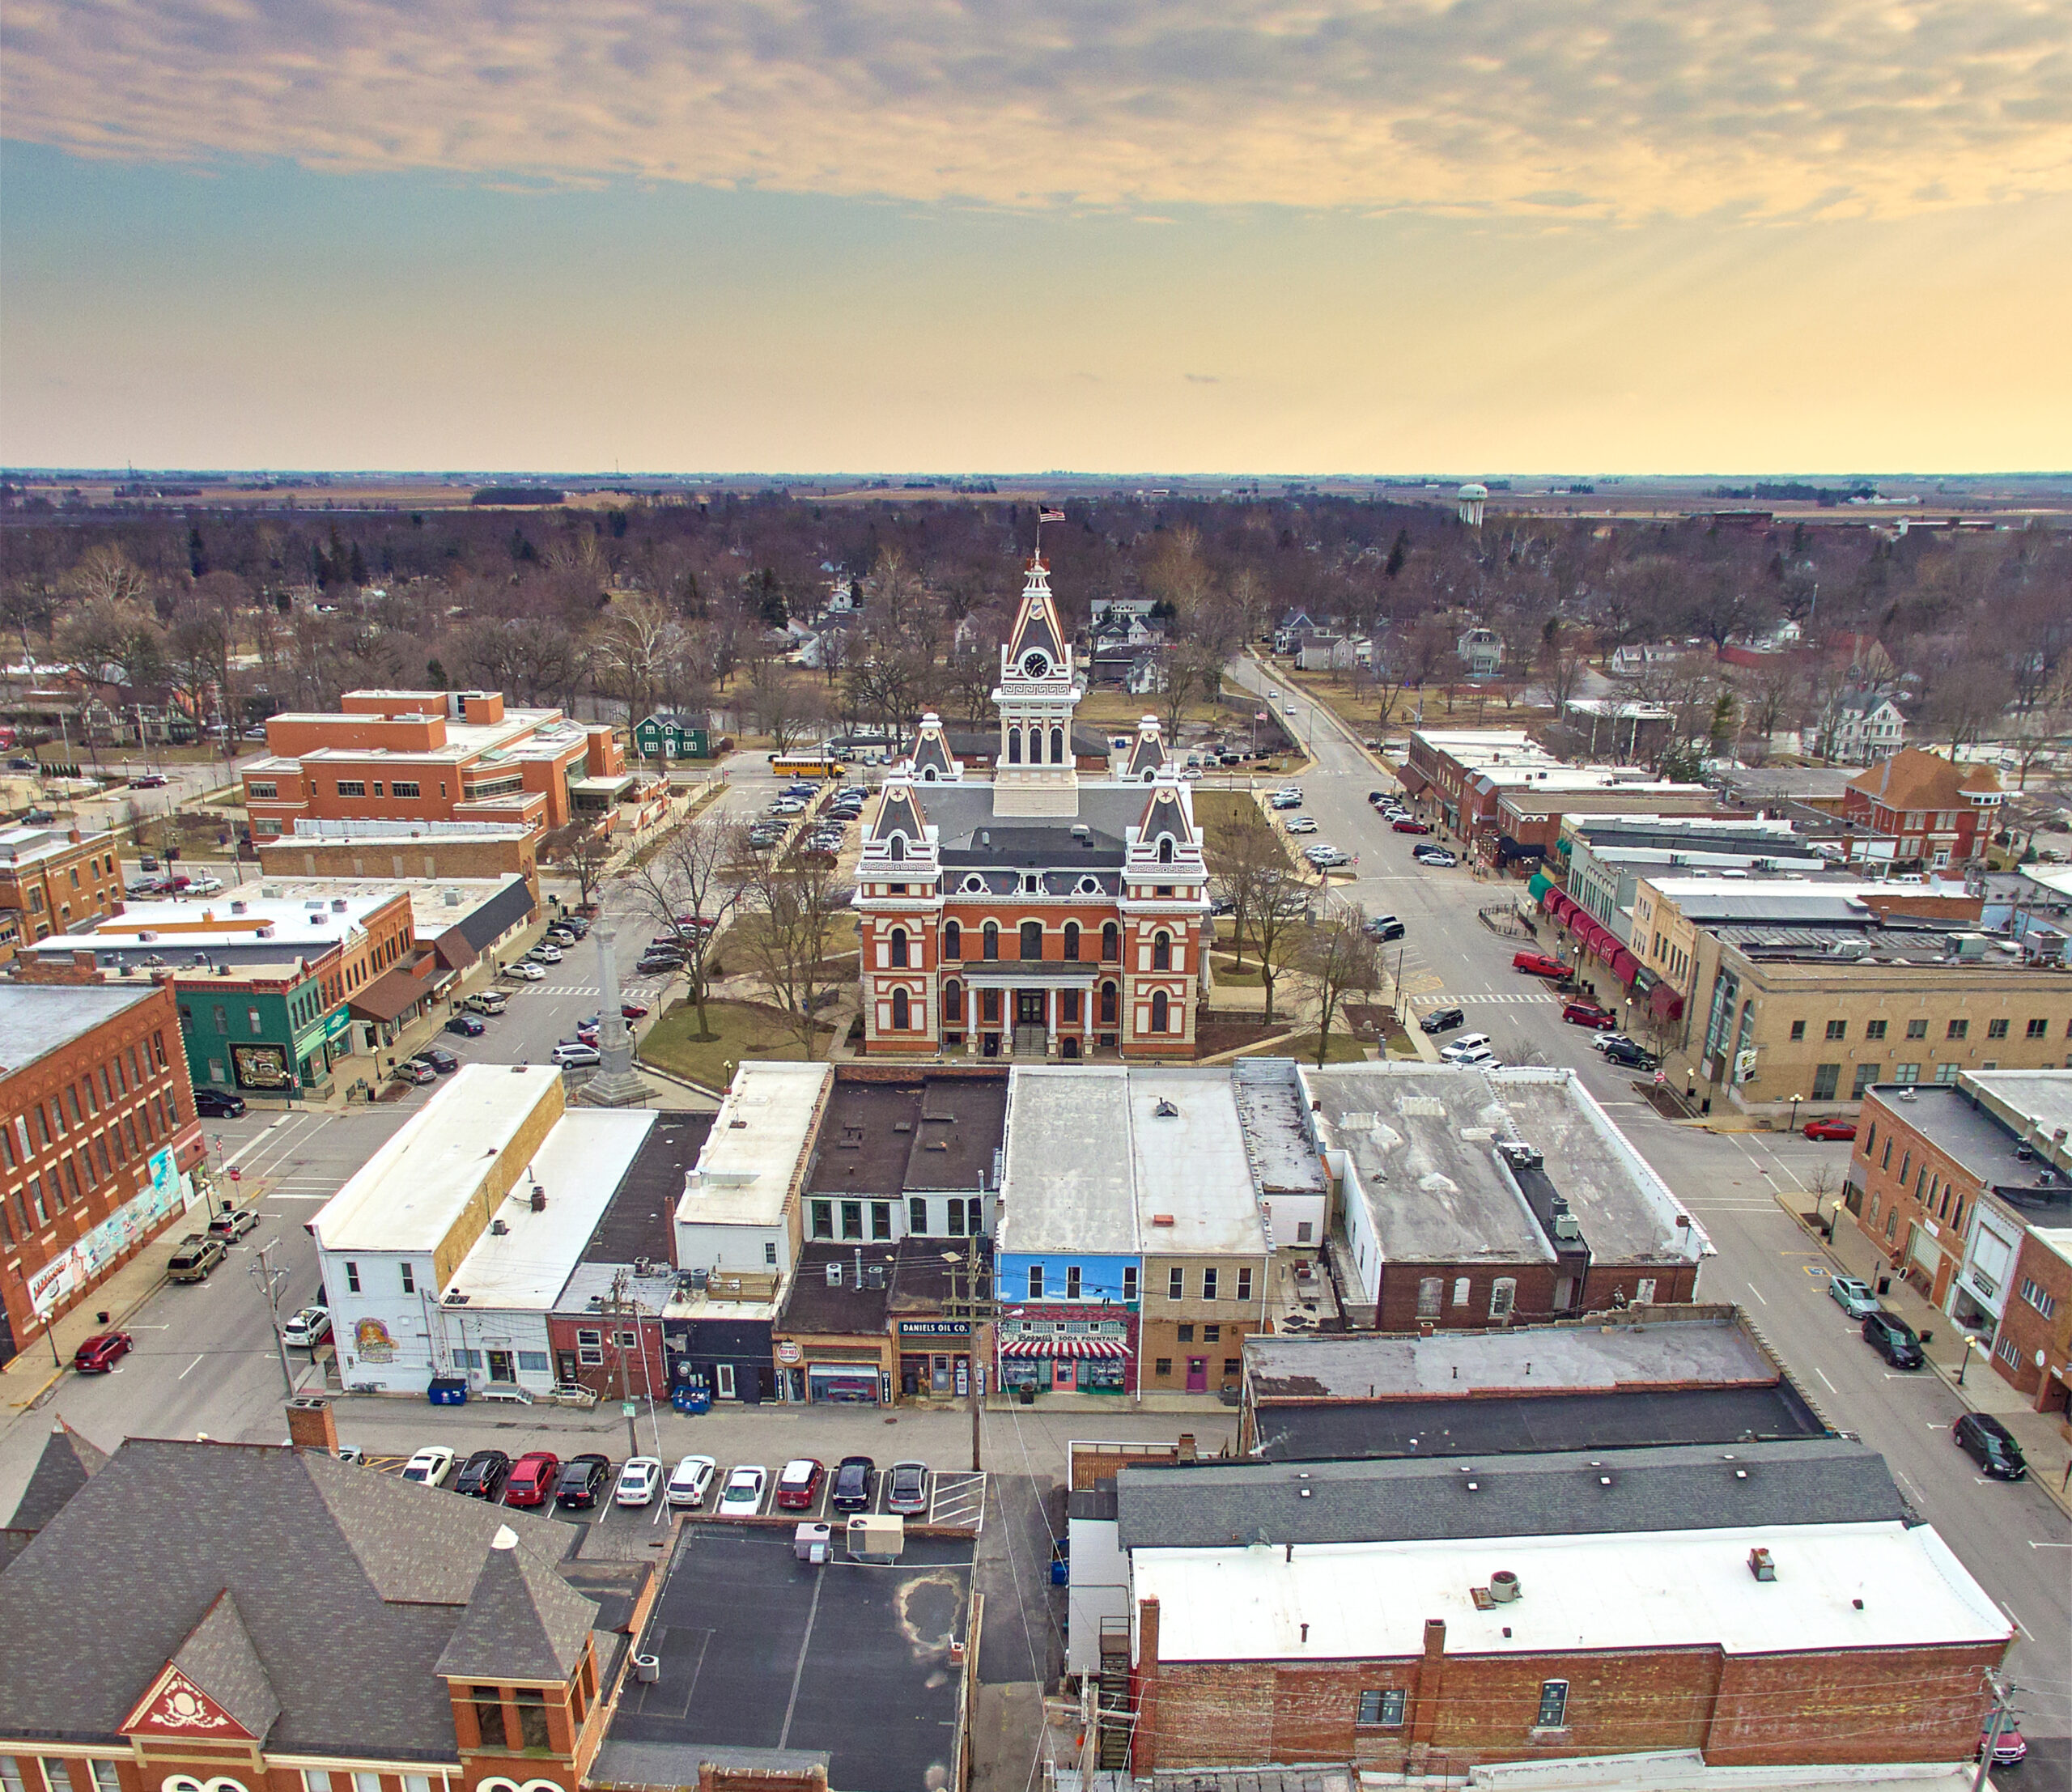 Drone image of downtown Pontiac, IL with the historic courthouse in the center